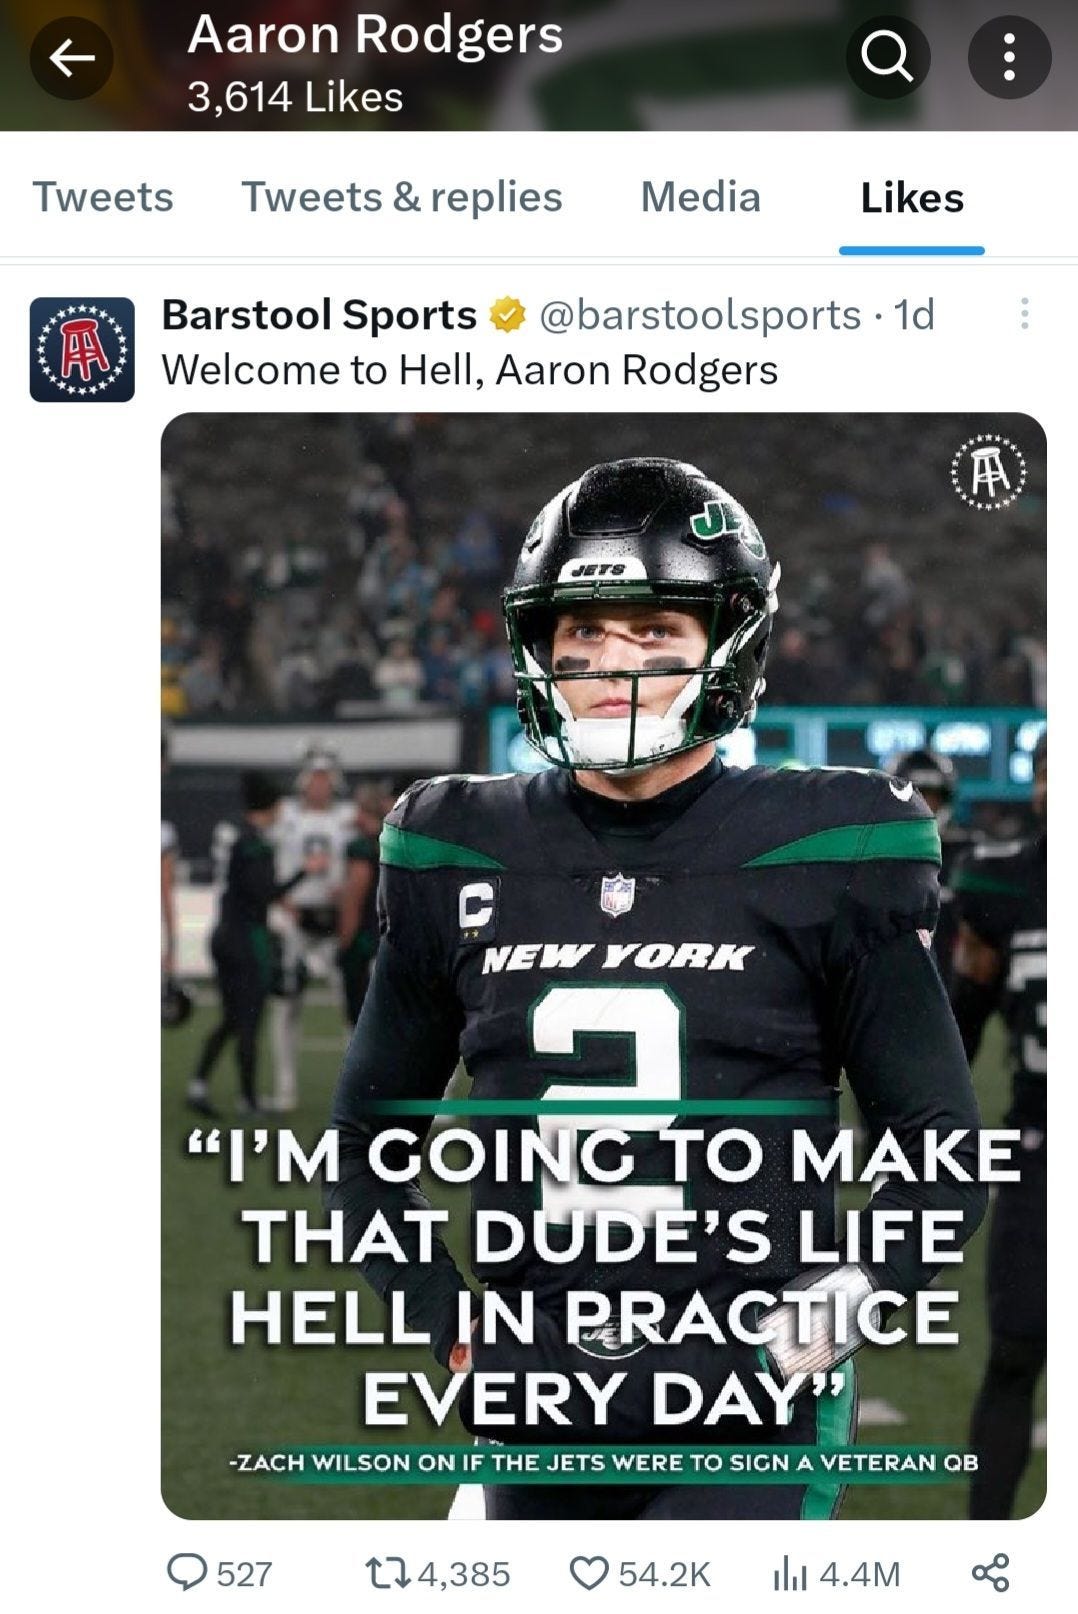 Aaron Rodgers liked Barstool Sports&#039; tweet about Zach Wilson&#039;s quote for the new Jets quarterback.